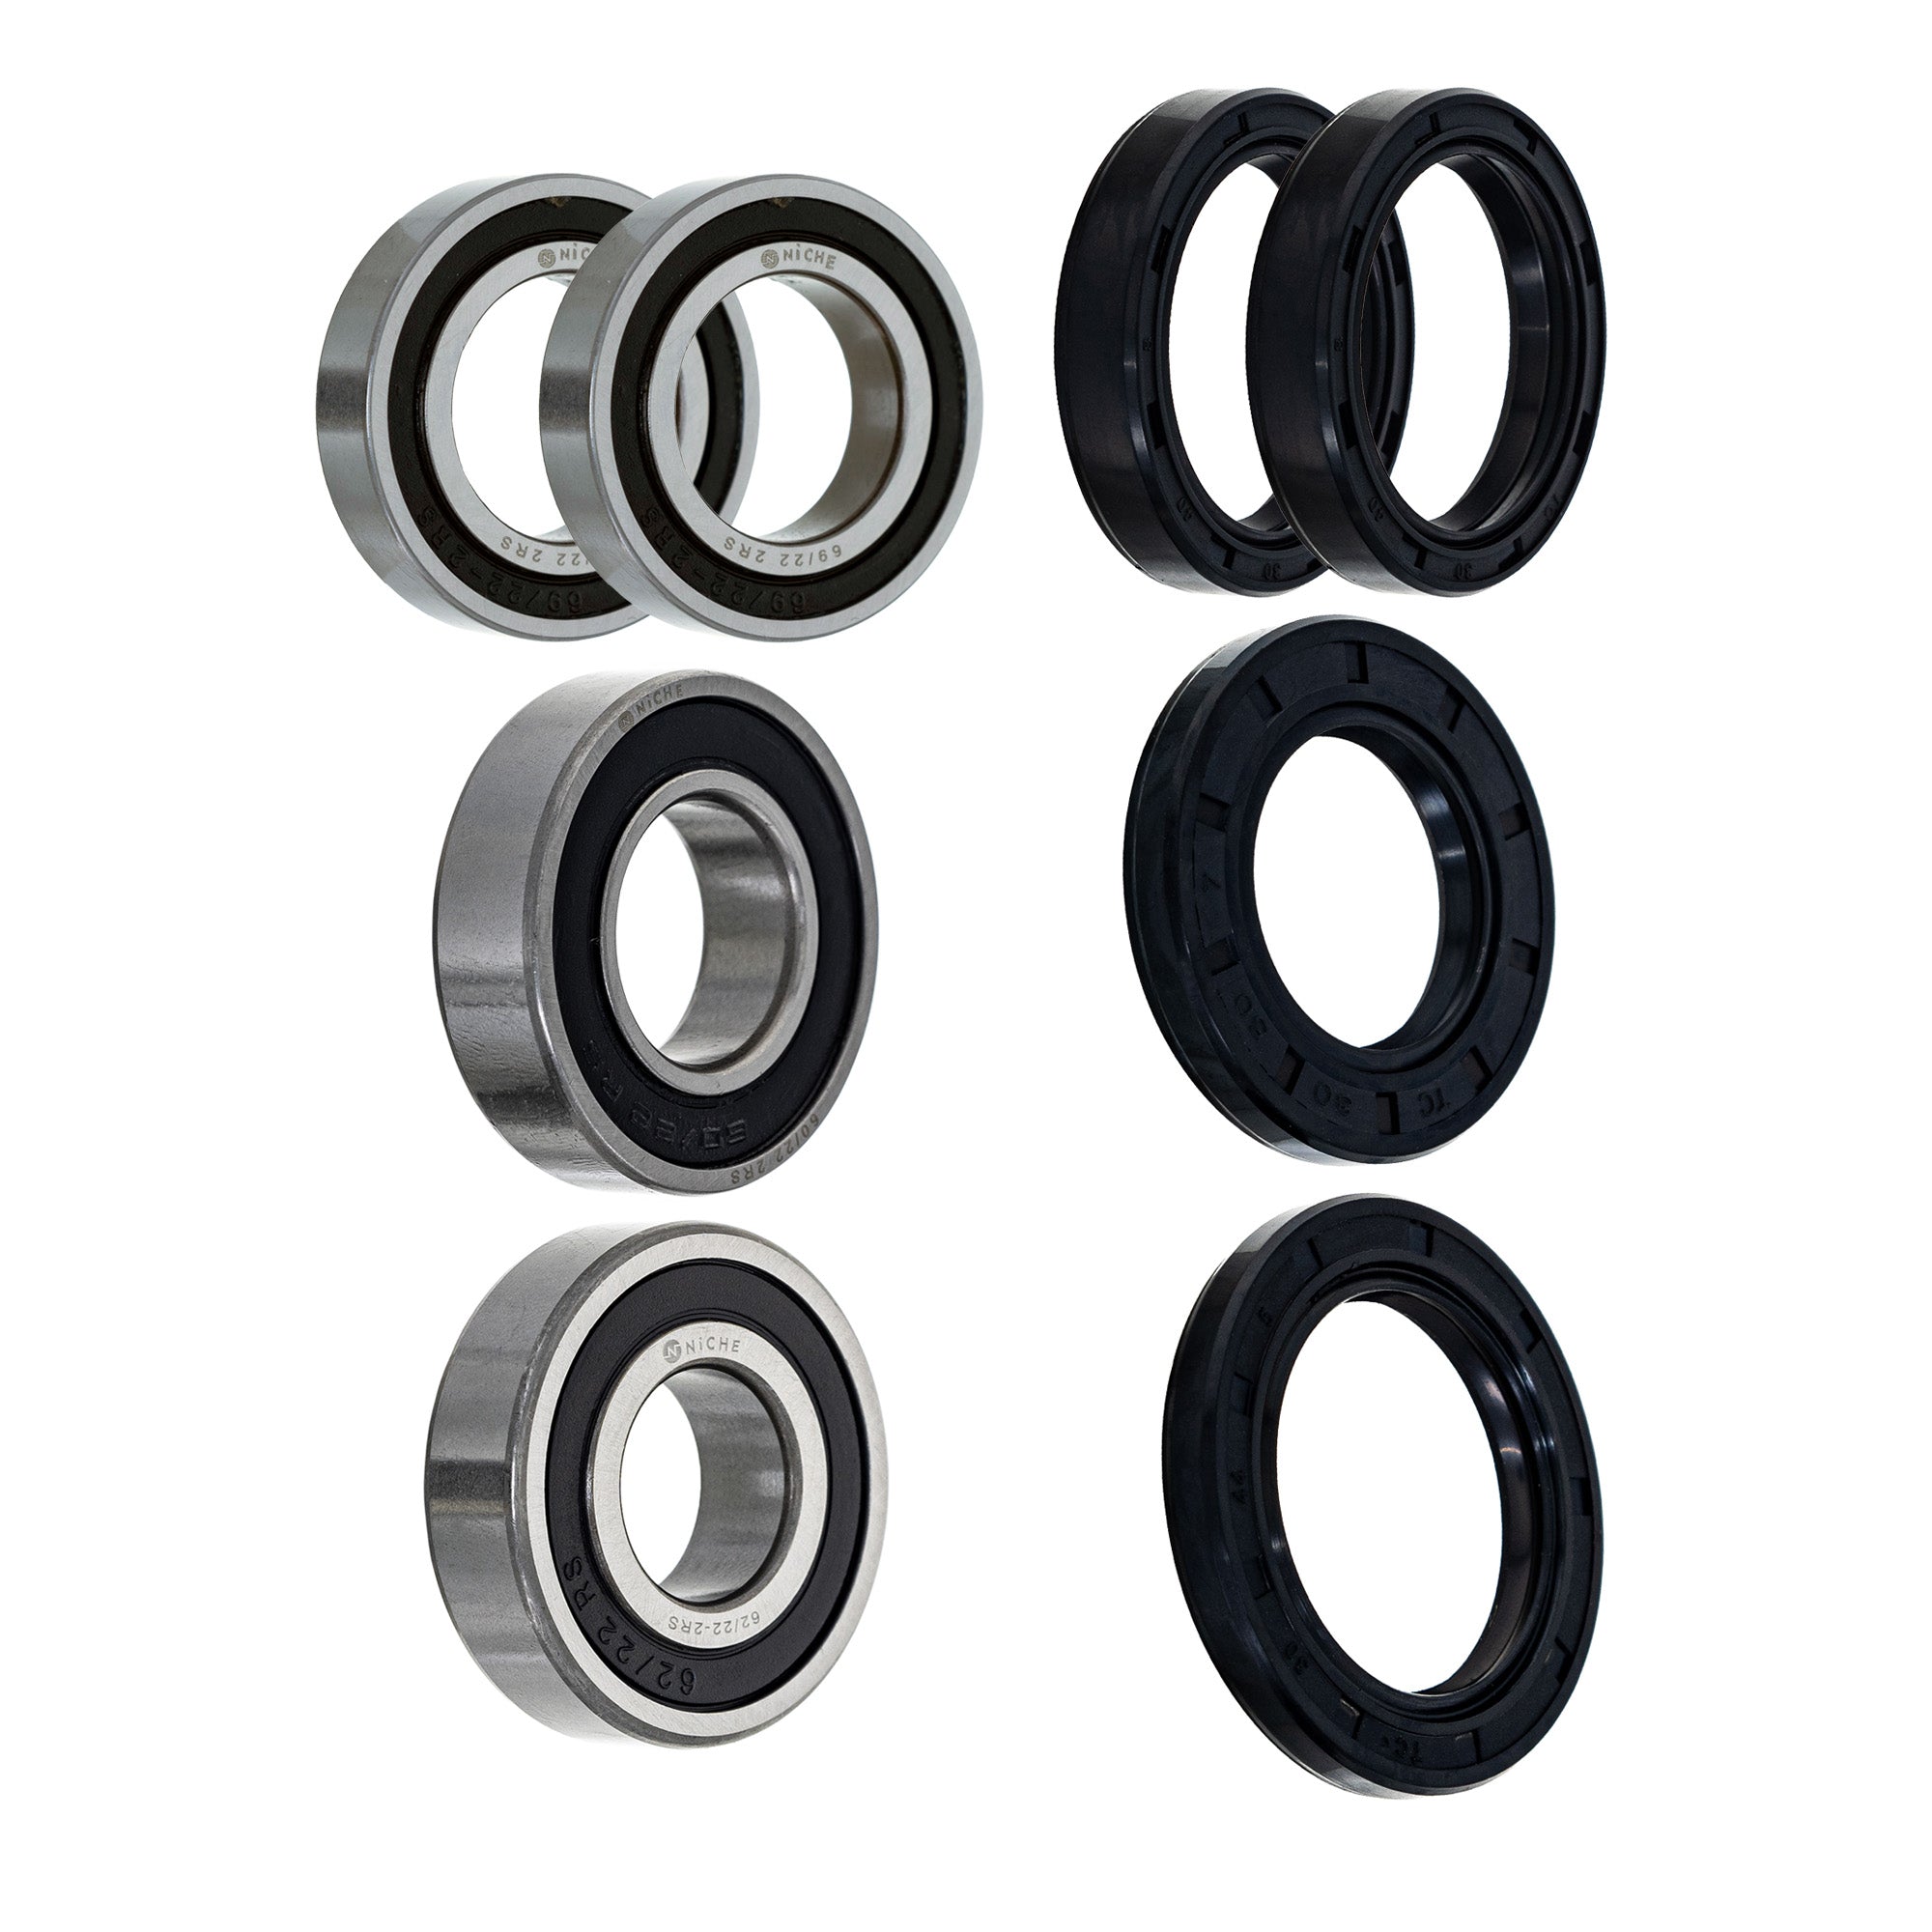 Wheel Bearing Seal Kit for zOTHER YZ450FX YZ250FX WR450F WR250F NICHE MK1008721